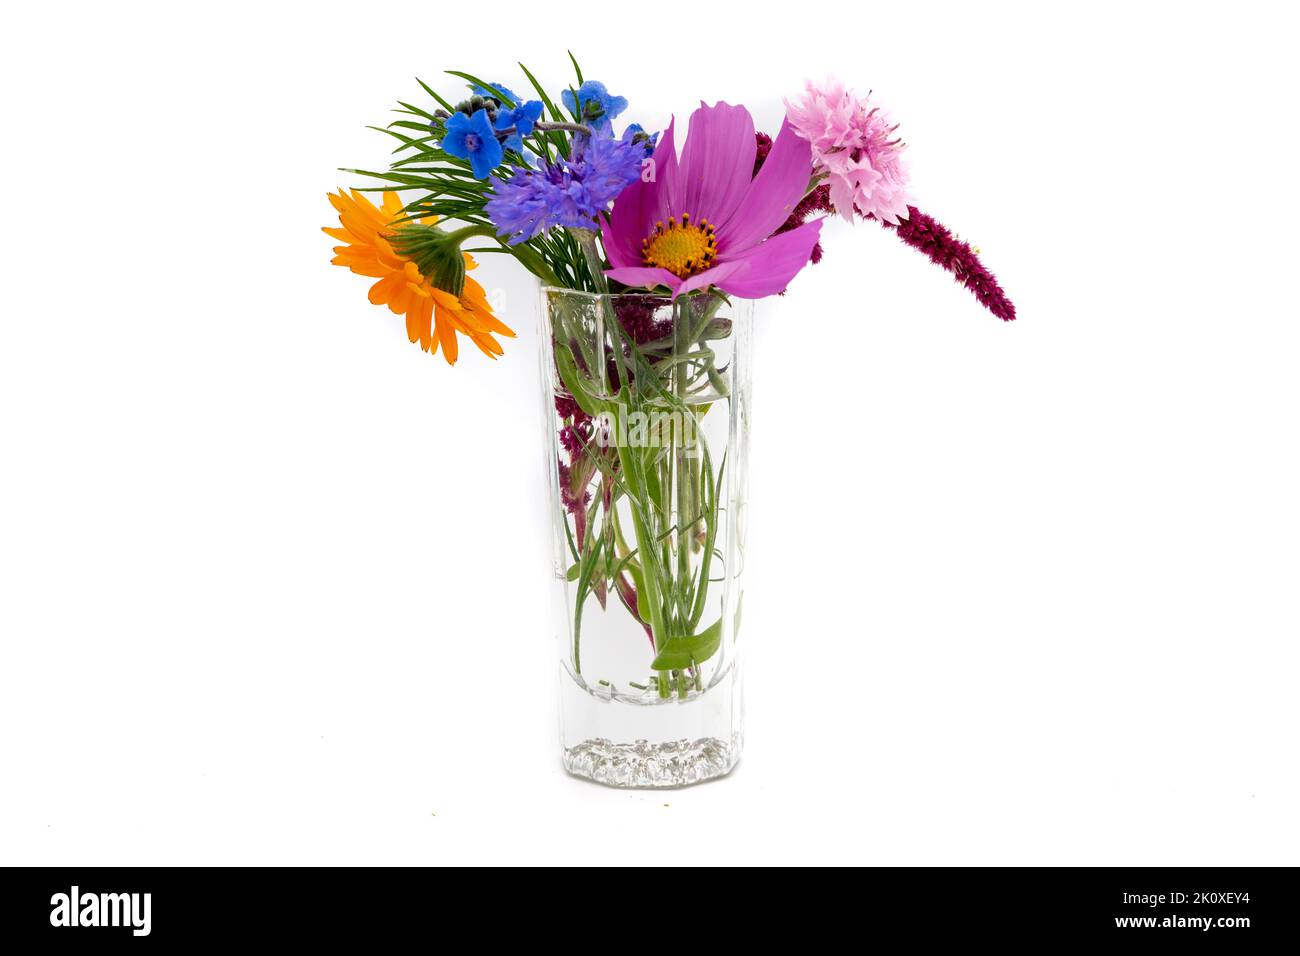 bouquet of autumn flowers with vase isolated on white background Stock Photo